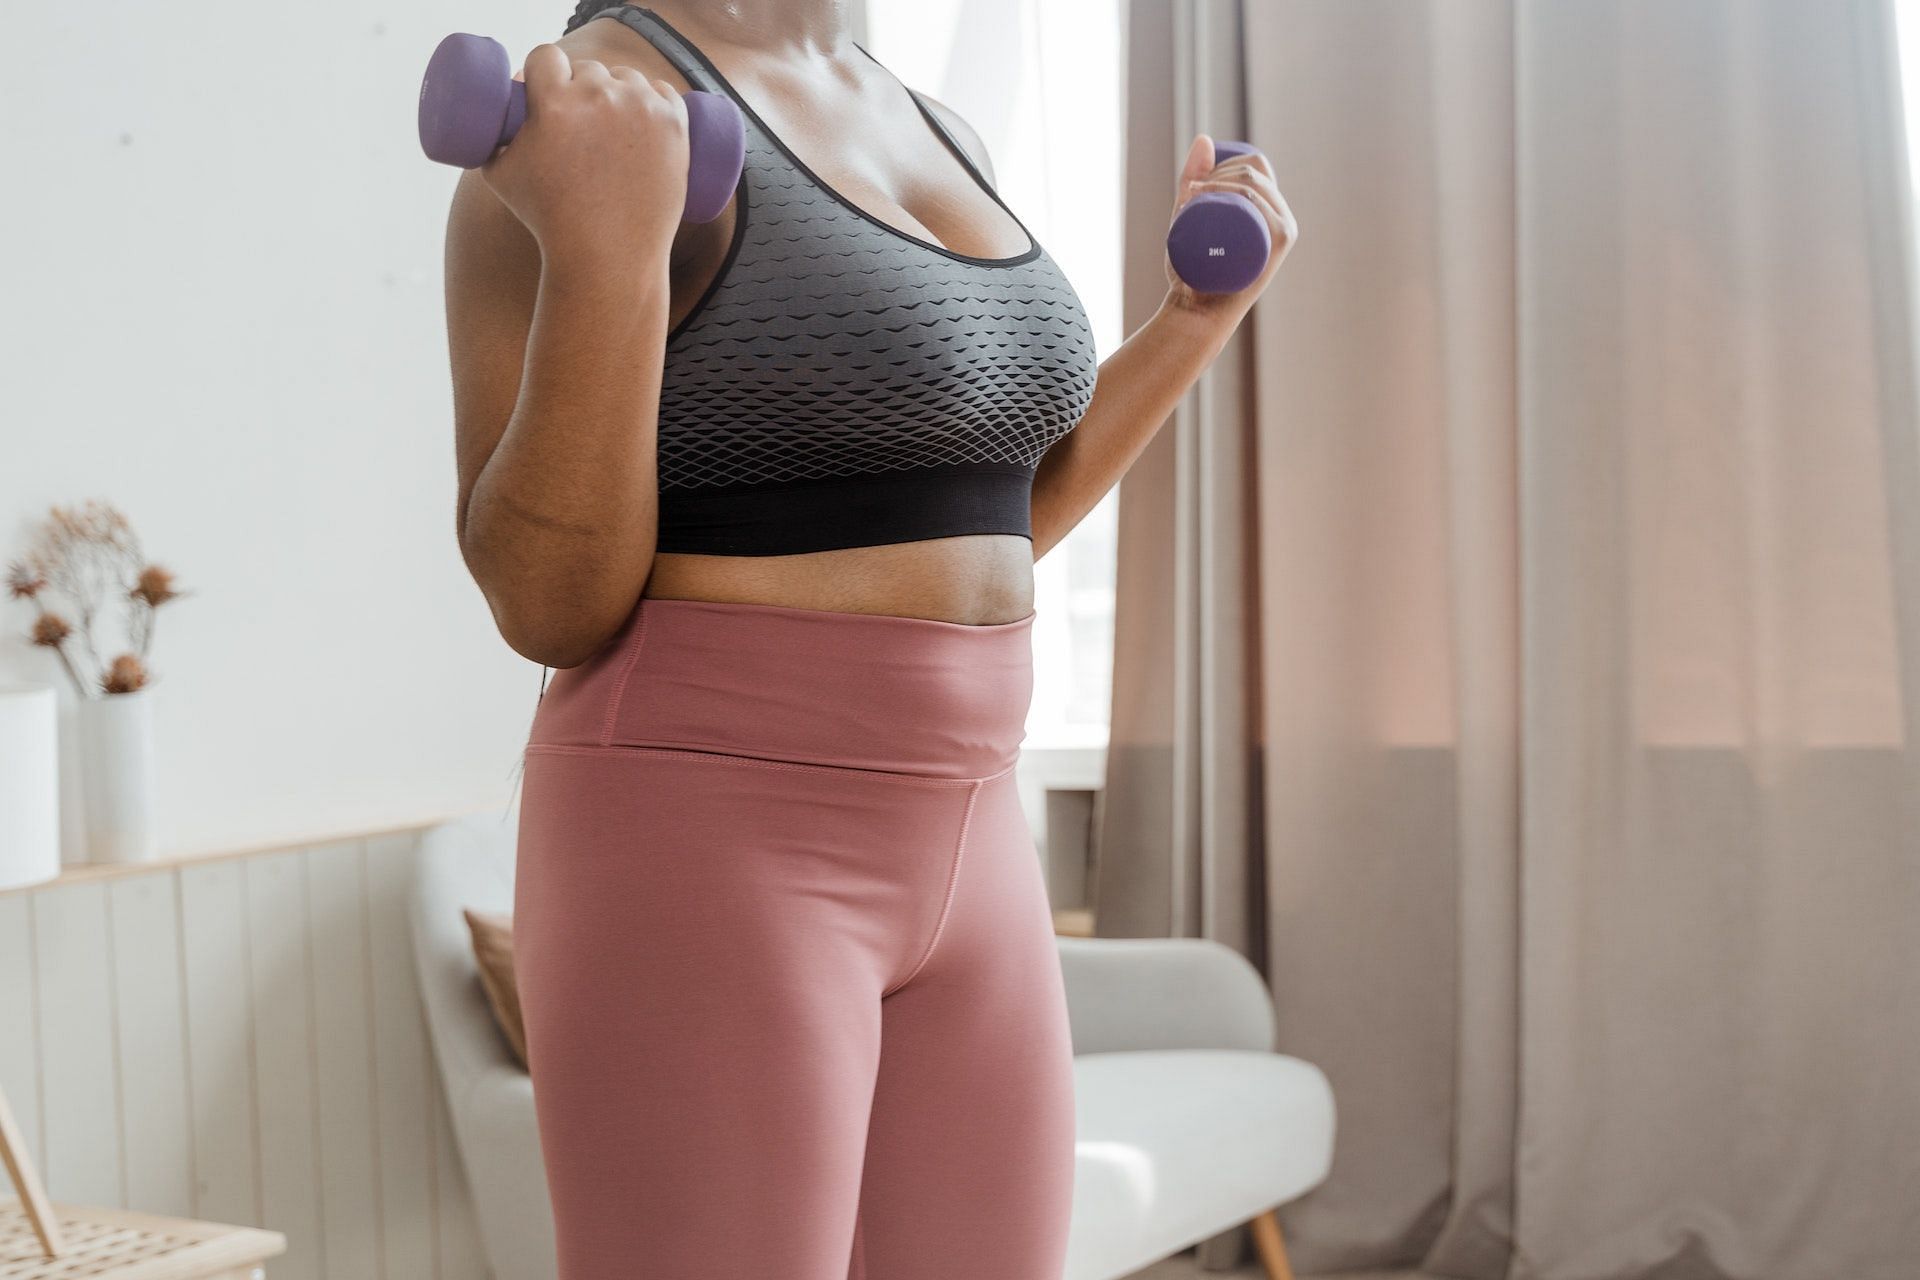 Strength training exercises can be done for toning the body. (Photo via Pexels/MART PRODUCTION)